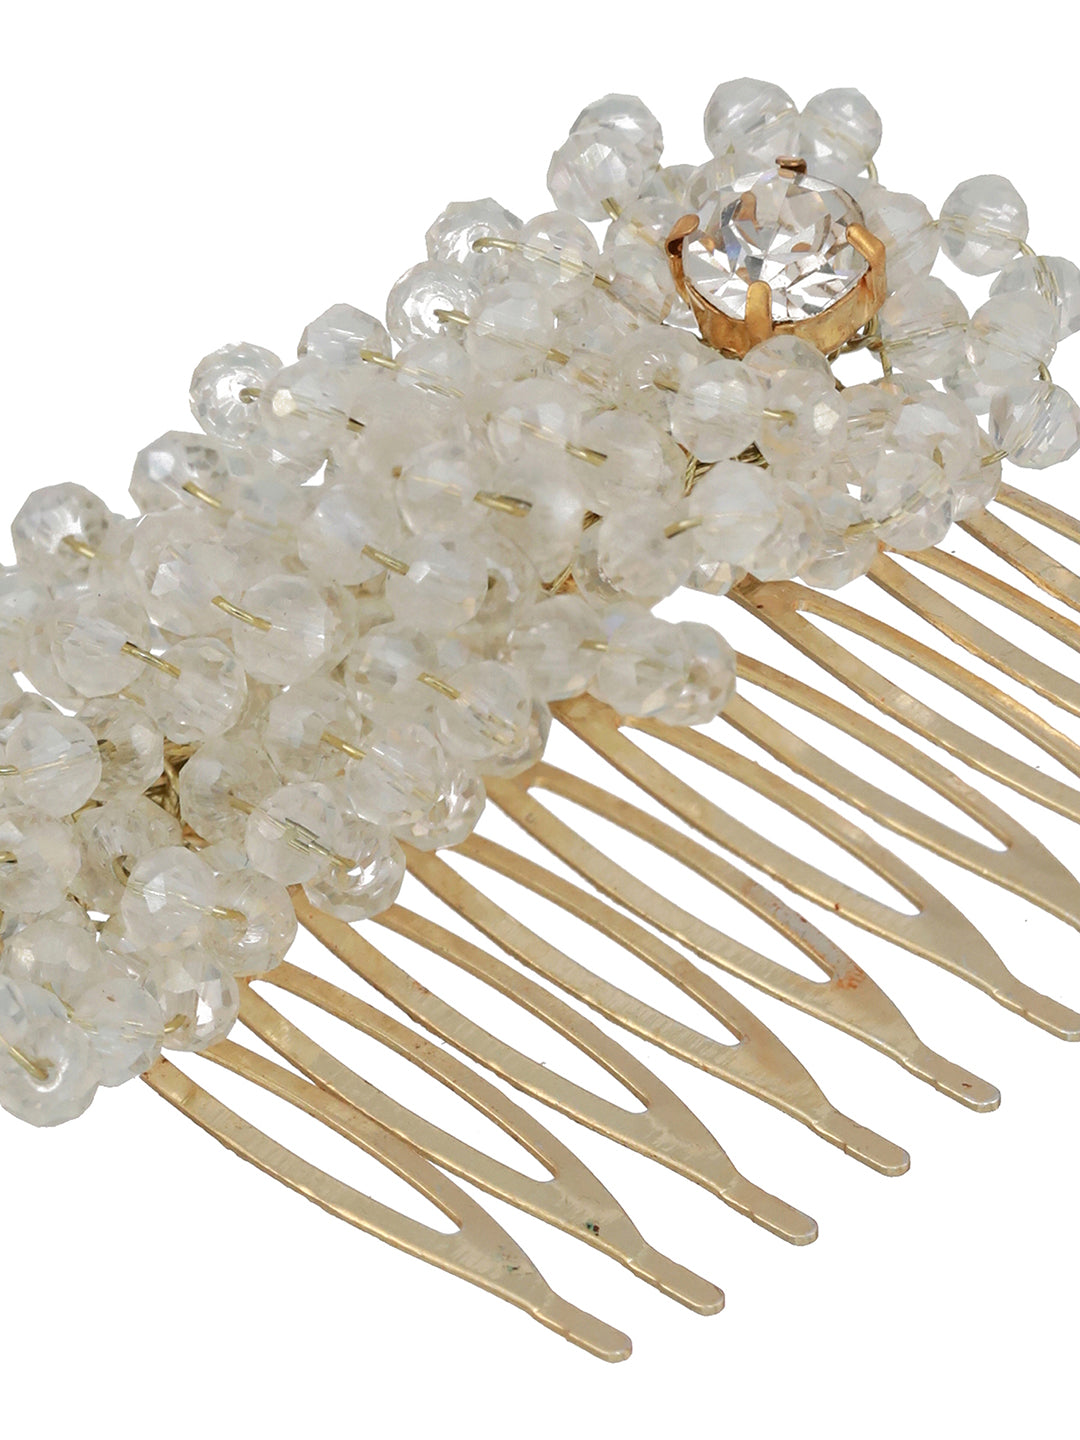 Women Gold Plated & White Embellished Comb Pin